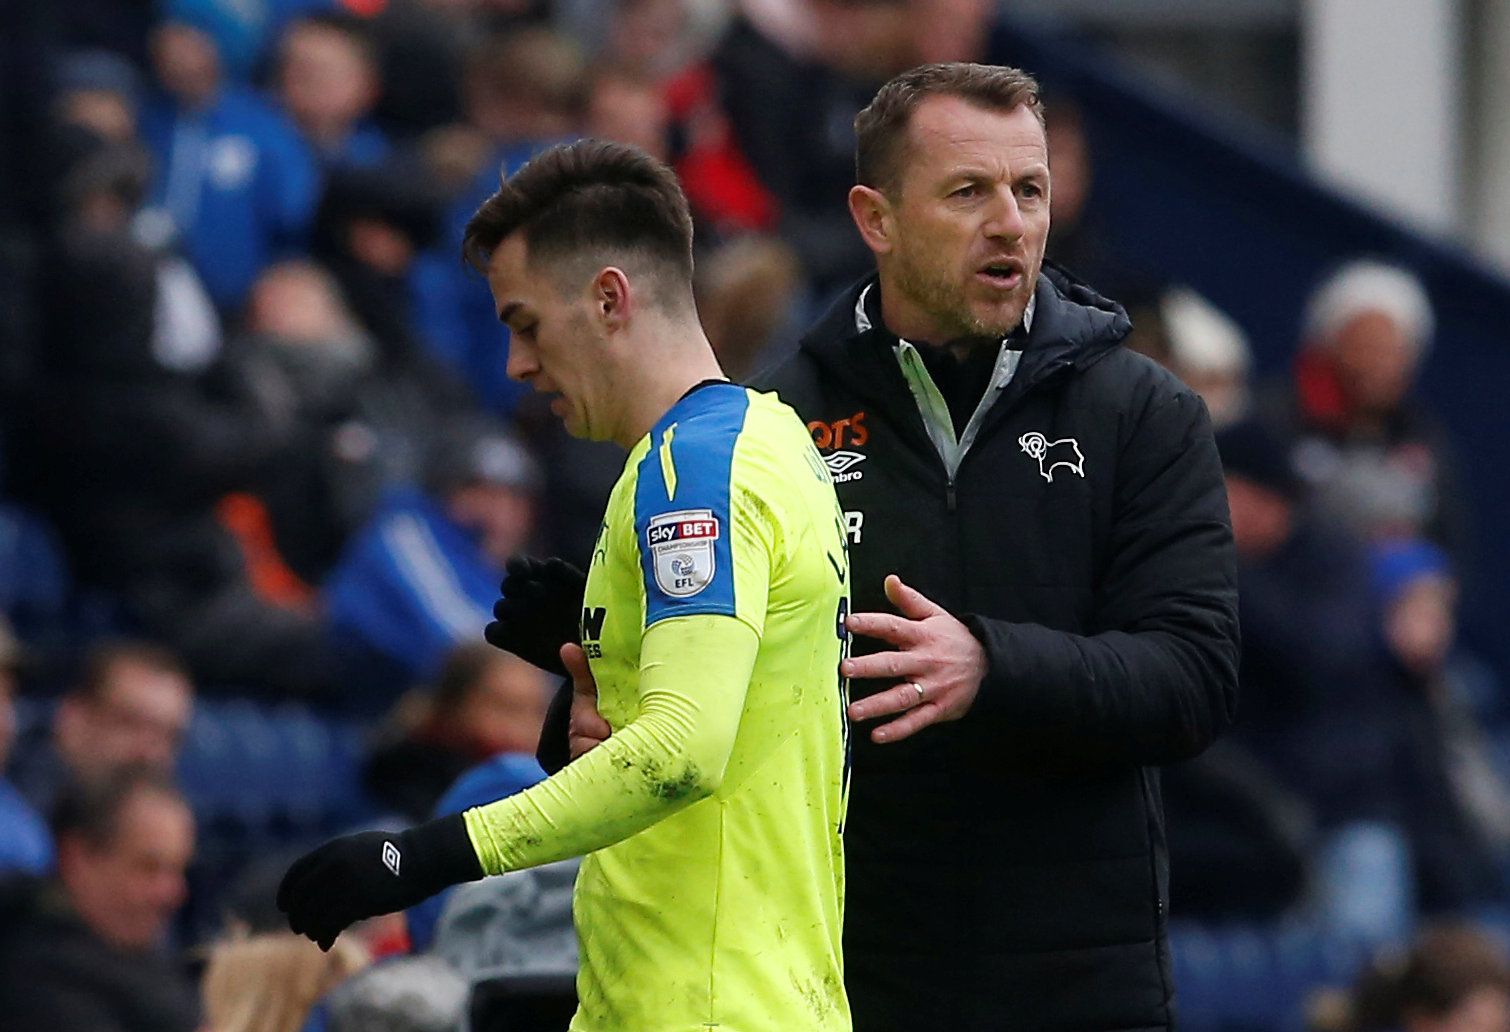 Soccer Football - Championship - Preston North End vs Derby County - Deepdale, Preston, Britain - April 2, 2018   Derby County manager Gary Rowett congratulates Tom Lawrence as he is substituted   Action Images/Craig Brough    EDITORIAL USE ONLY. No use with unauthorized audio, video, data, fixture lists, club/league logos or 